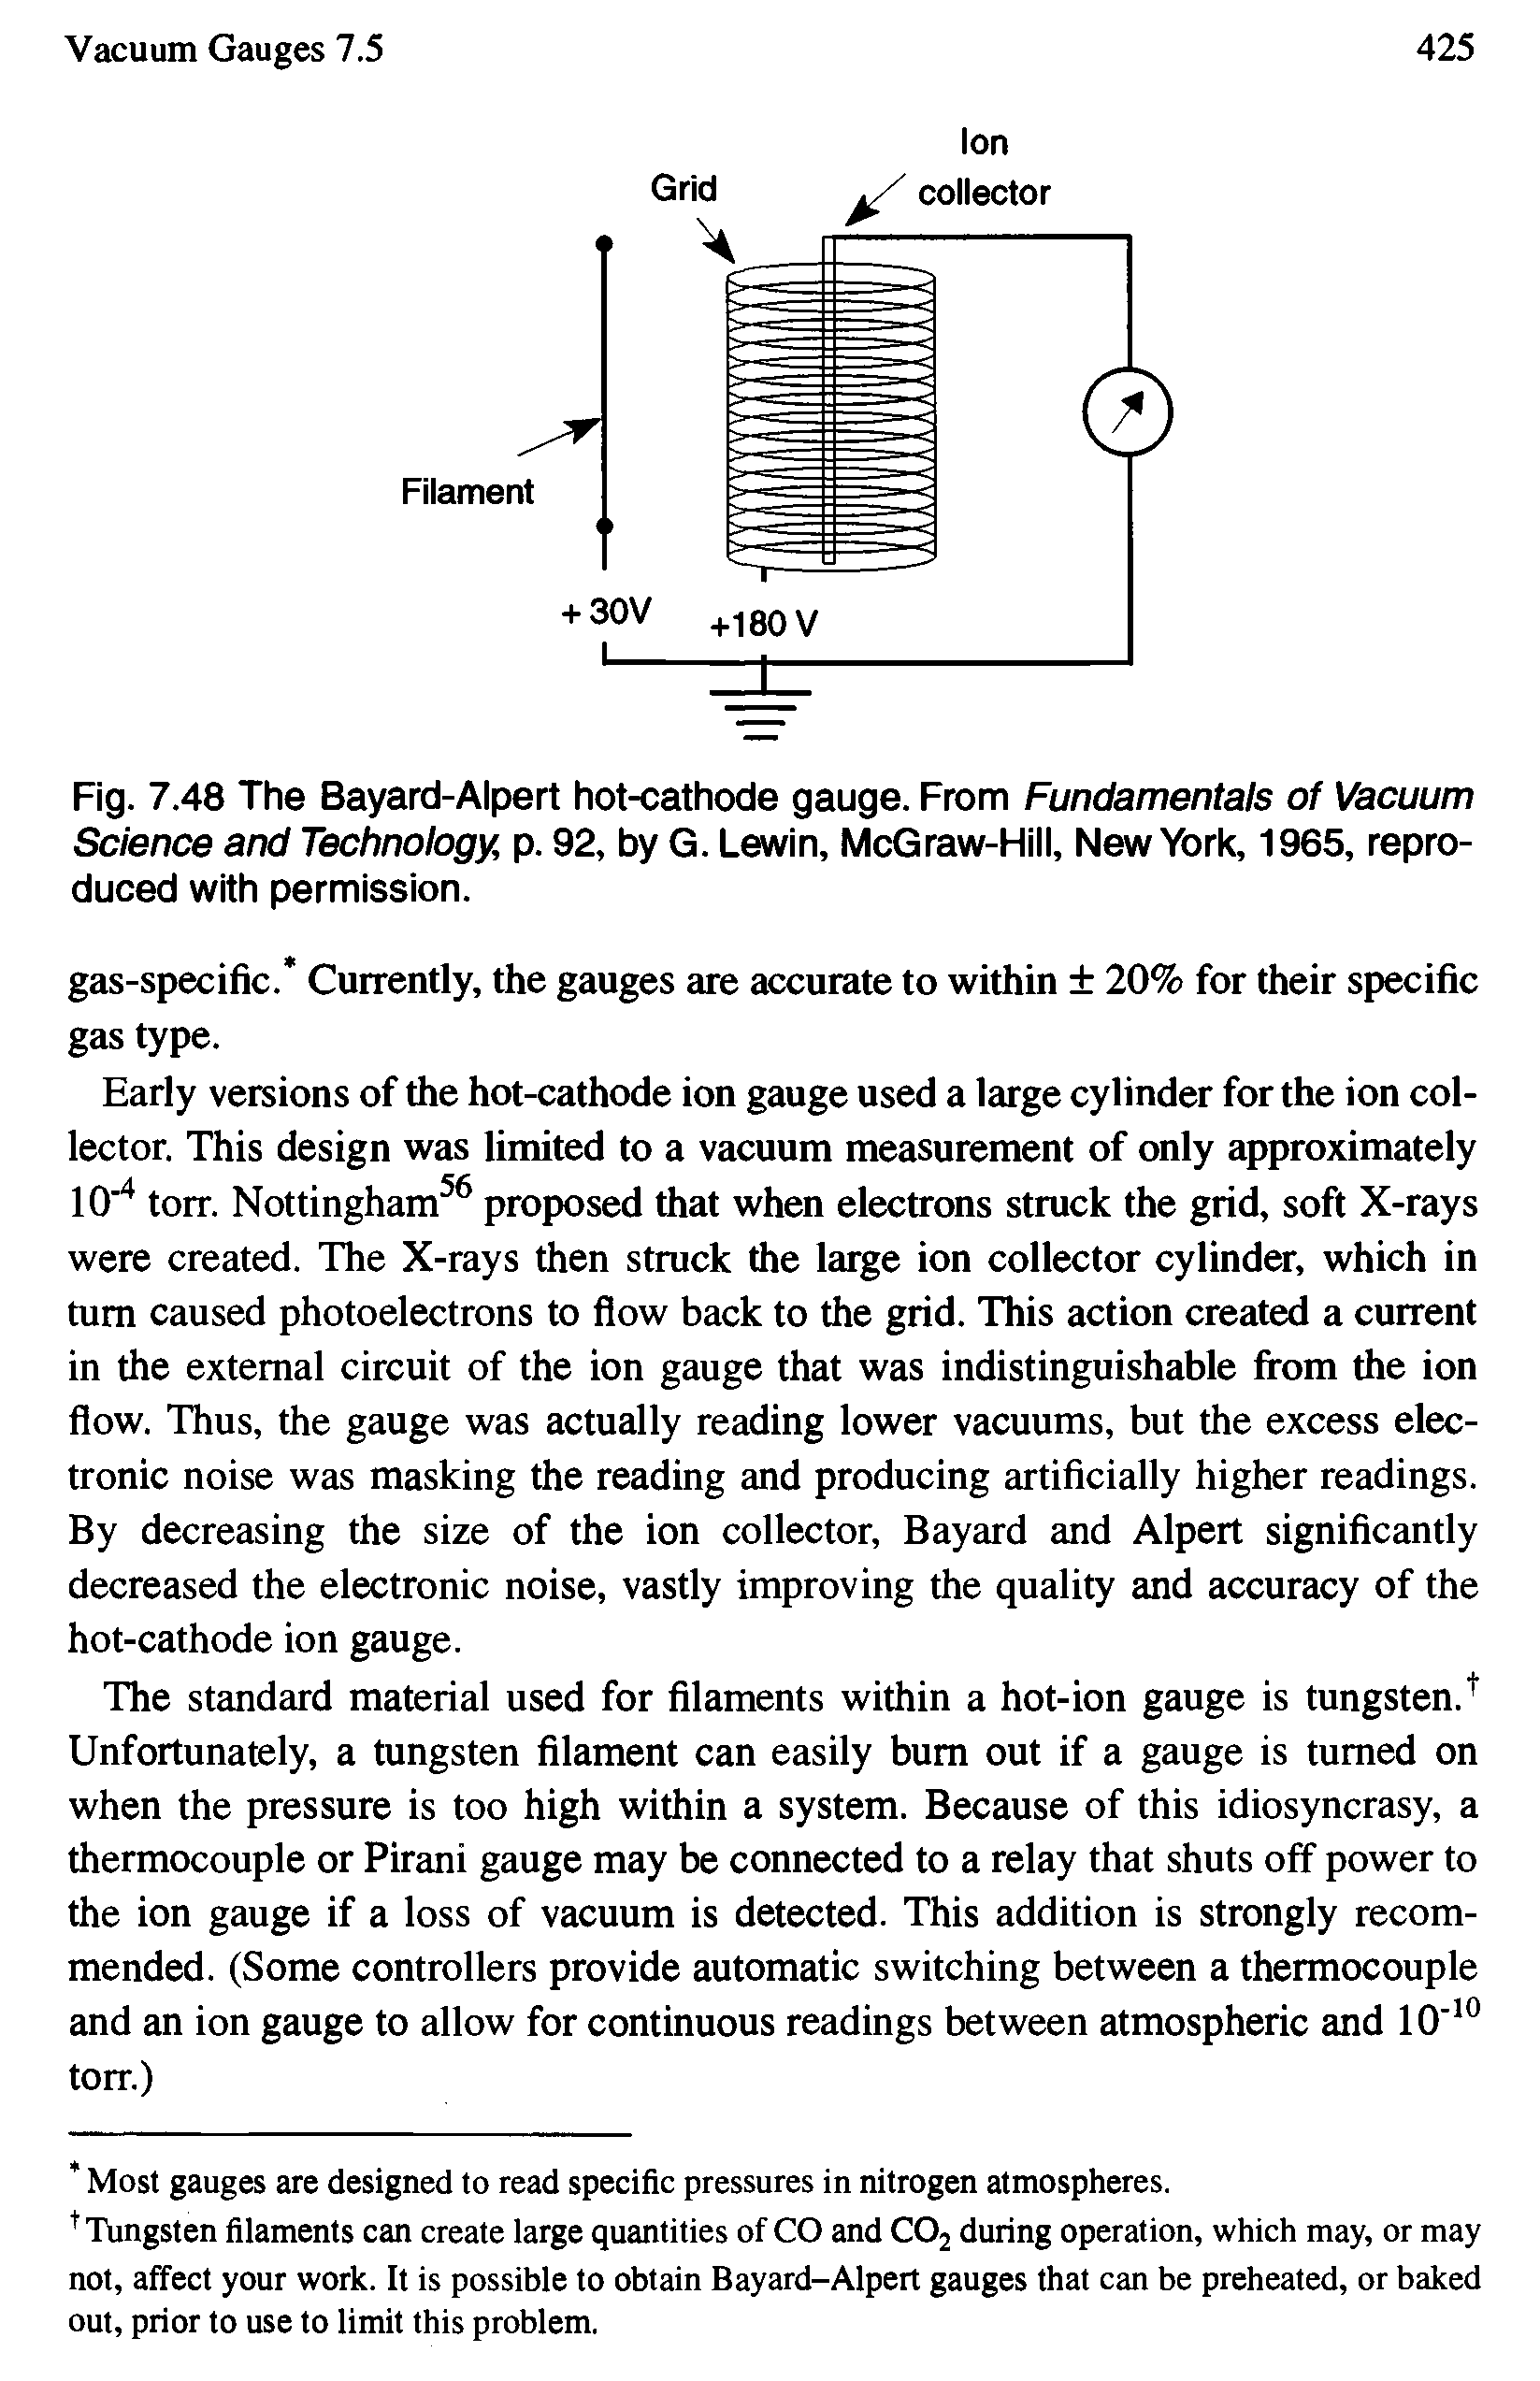 Fig. 7.48 The Bayard-Alpert hot-cathode gauge. From Fundamentals of Vacuum Science and Technology, p. 92, by G. Lewin, McGraw-Hill, New York, 1965, reproduced with permission.